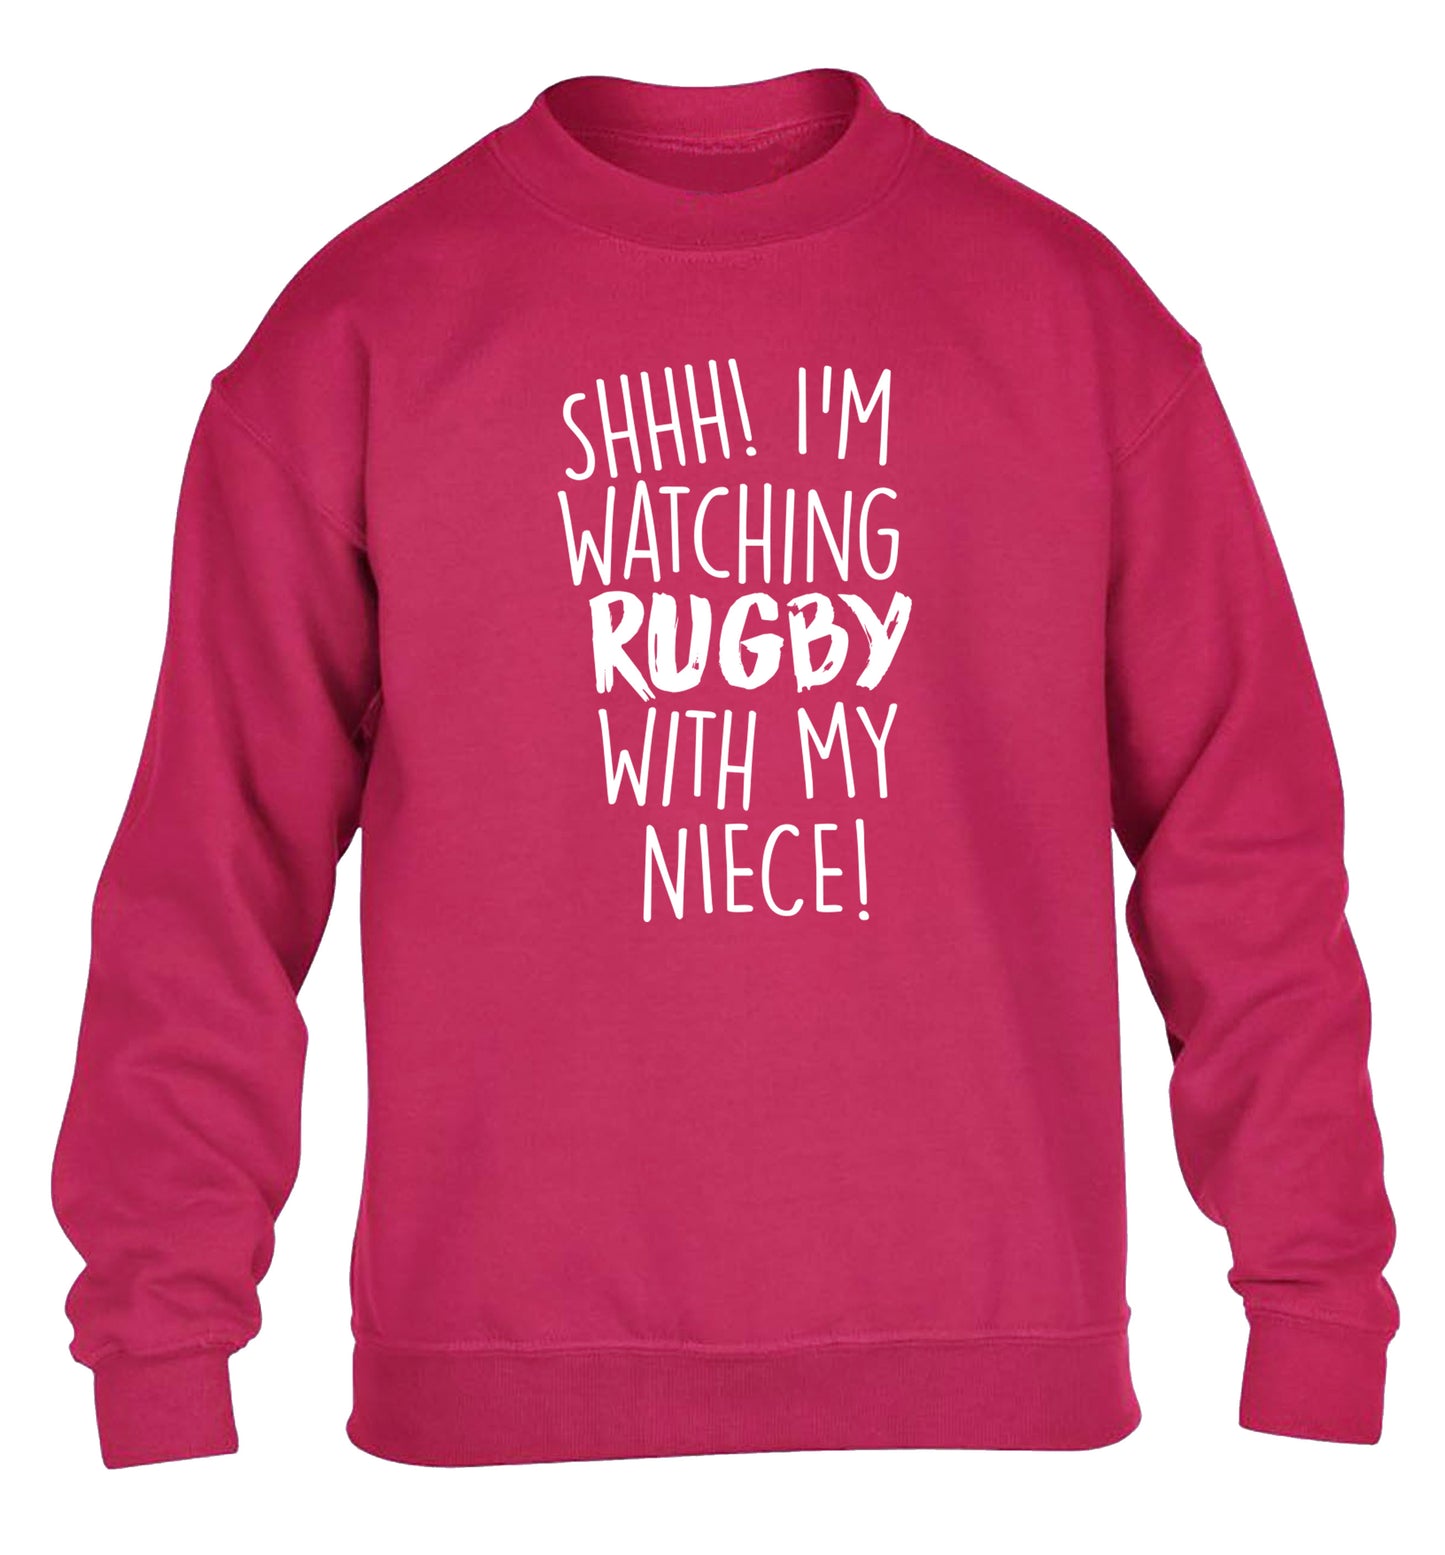 Shh.. I'm watching rugby with my niece children's pink sweater 12-13 Years